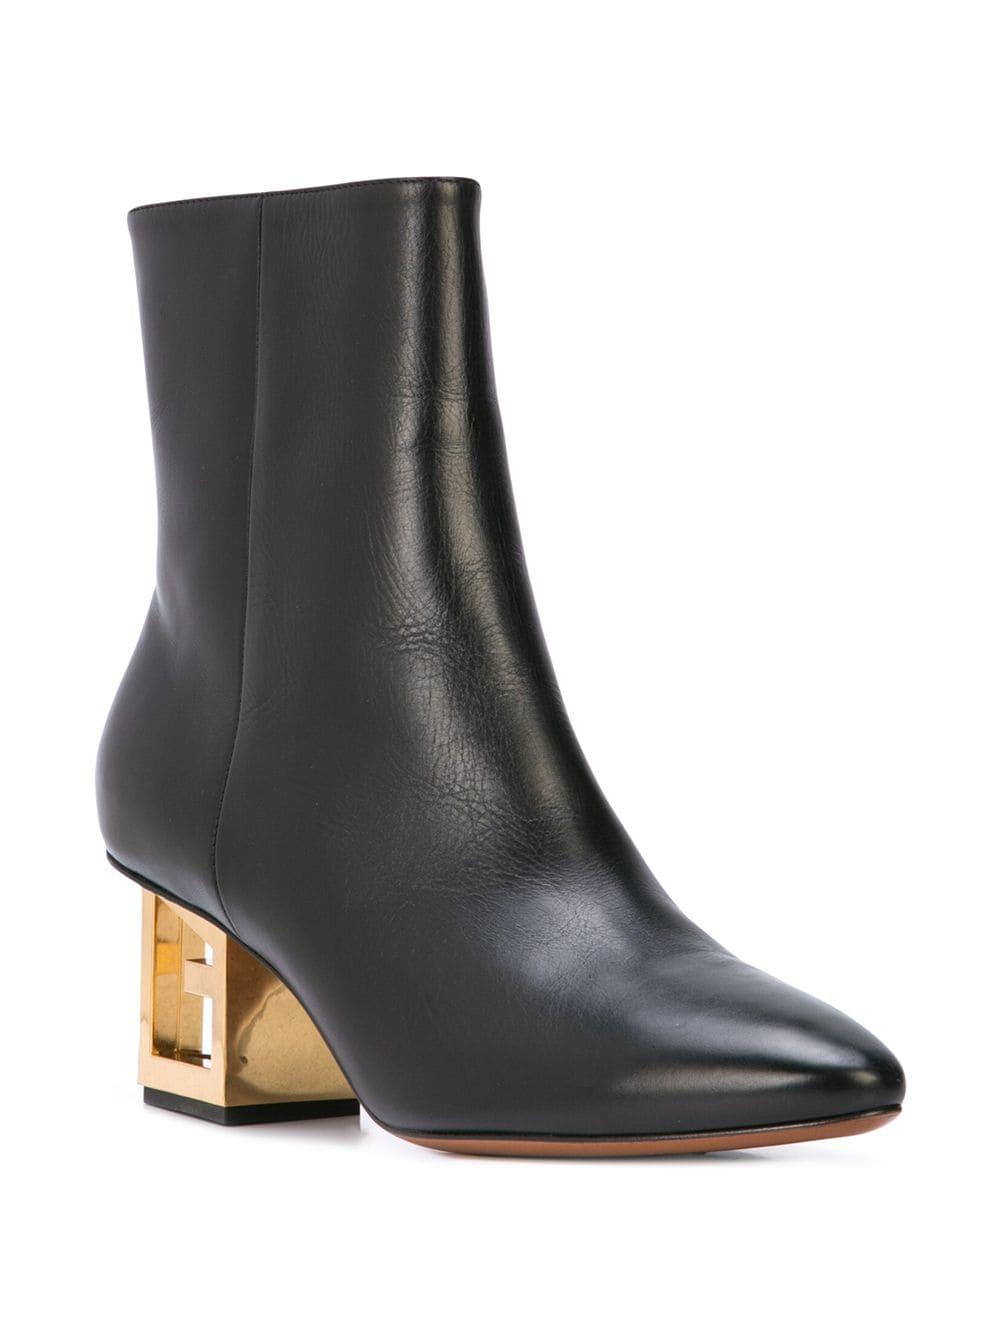 Givenchy Leather Gold G Heel Boots in Black | Lyst